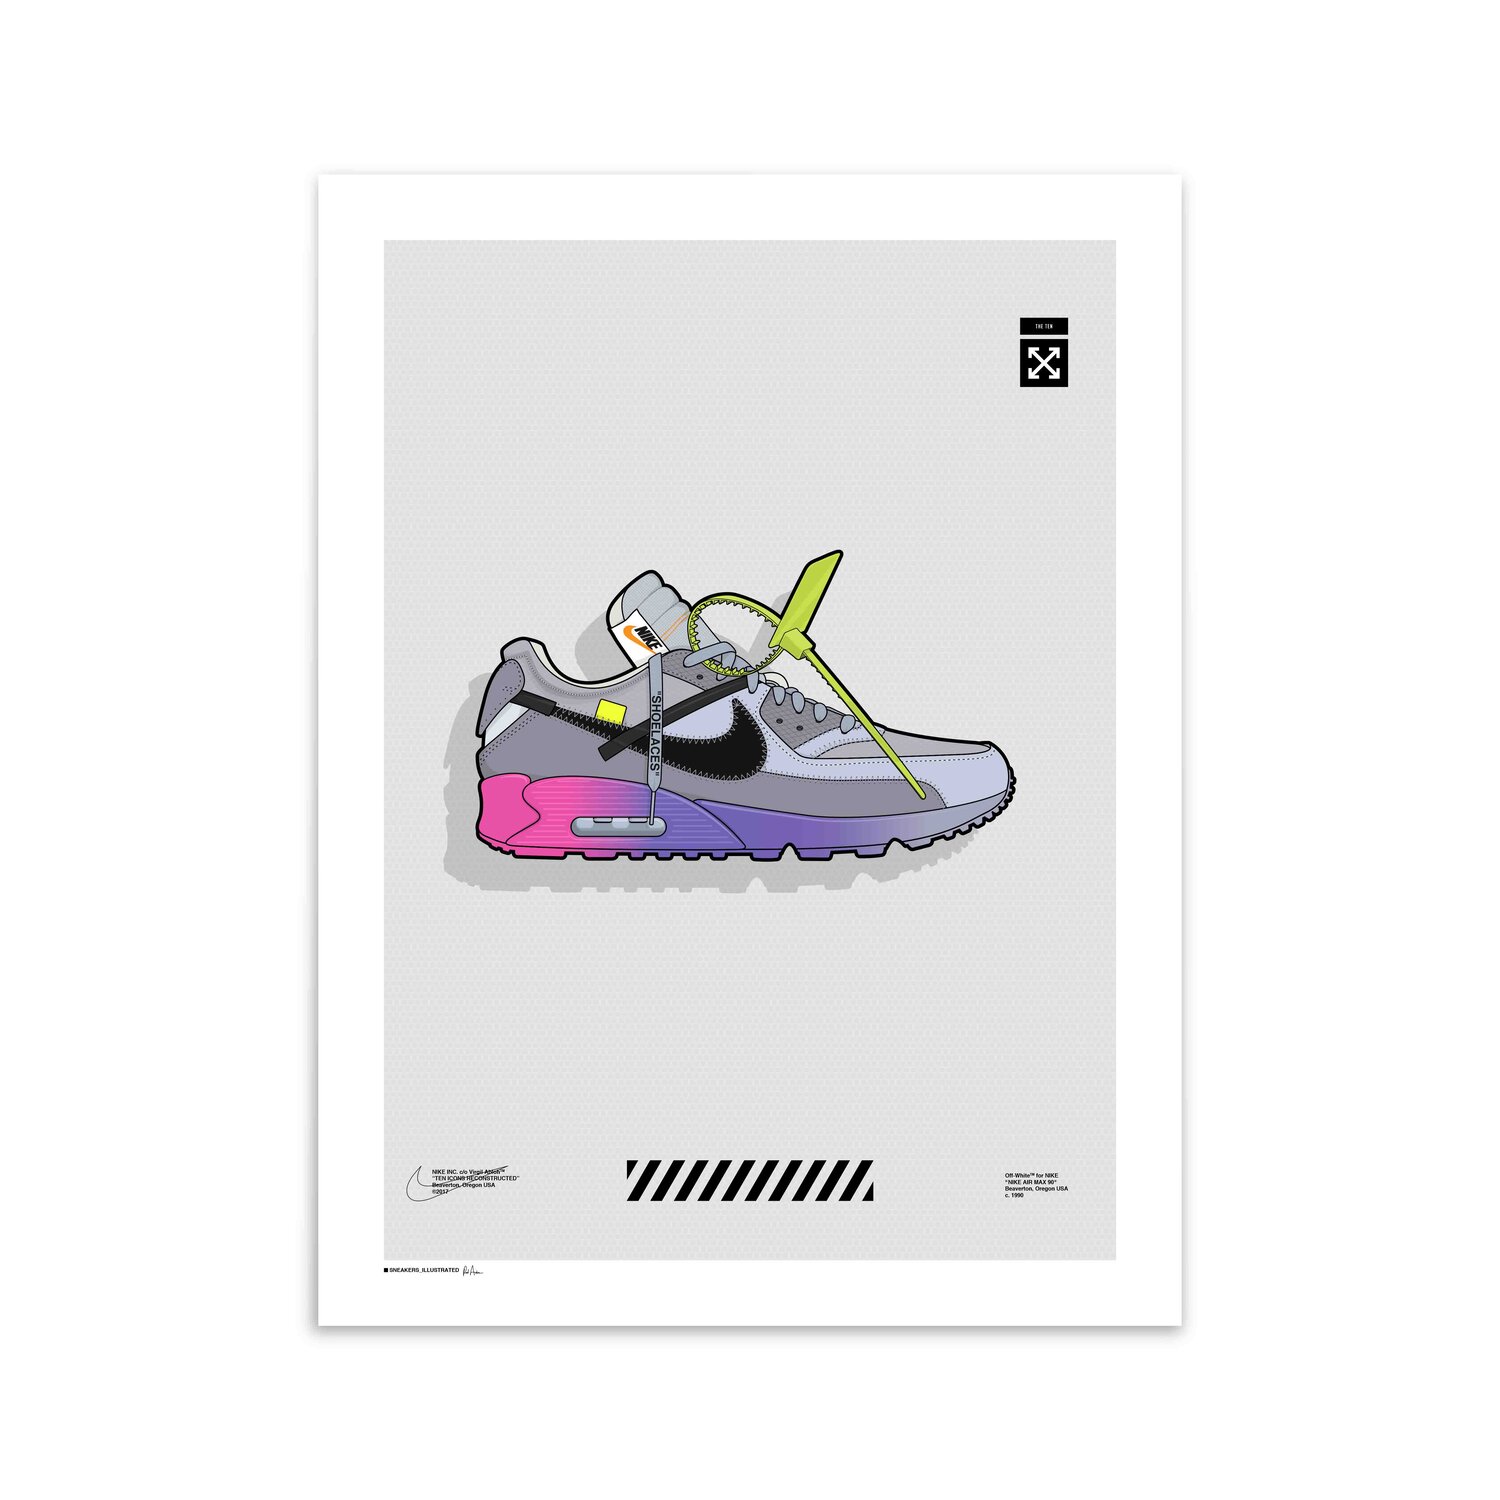 Off-White X Nike Air 90 'Queen [Concept]' Poster Sneakers Illustrated